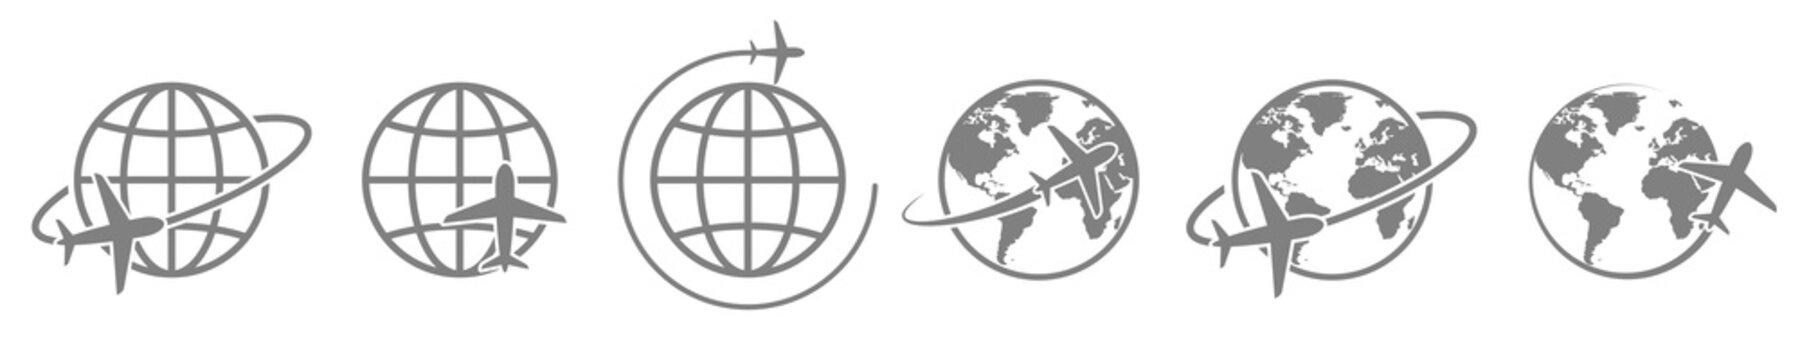 globe plane icon vector. airplane fly around the earth. international world fly sign symbol. isolated logo on white background. jet aircraft map global passenger cargo logistic concept